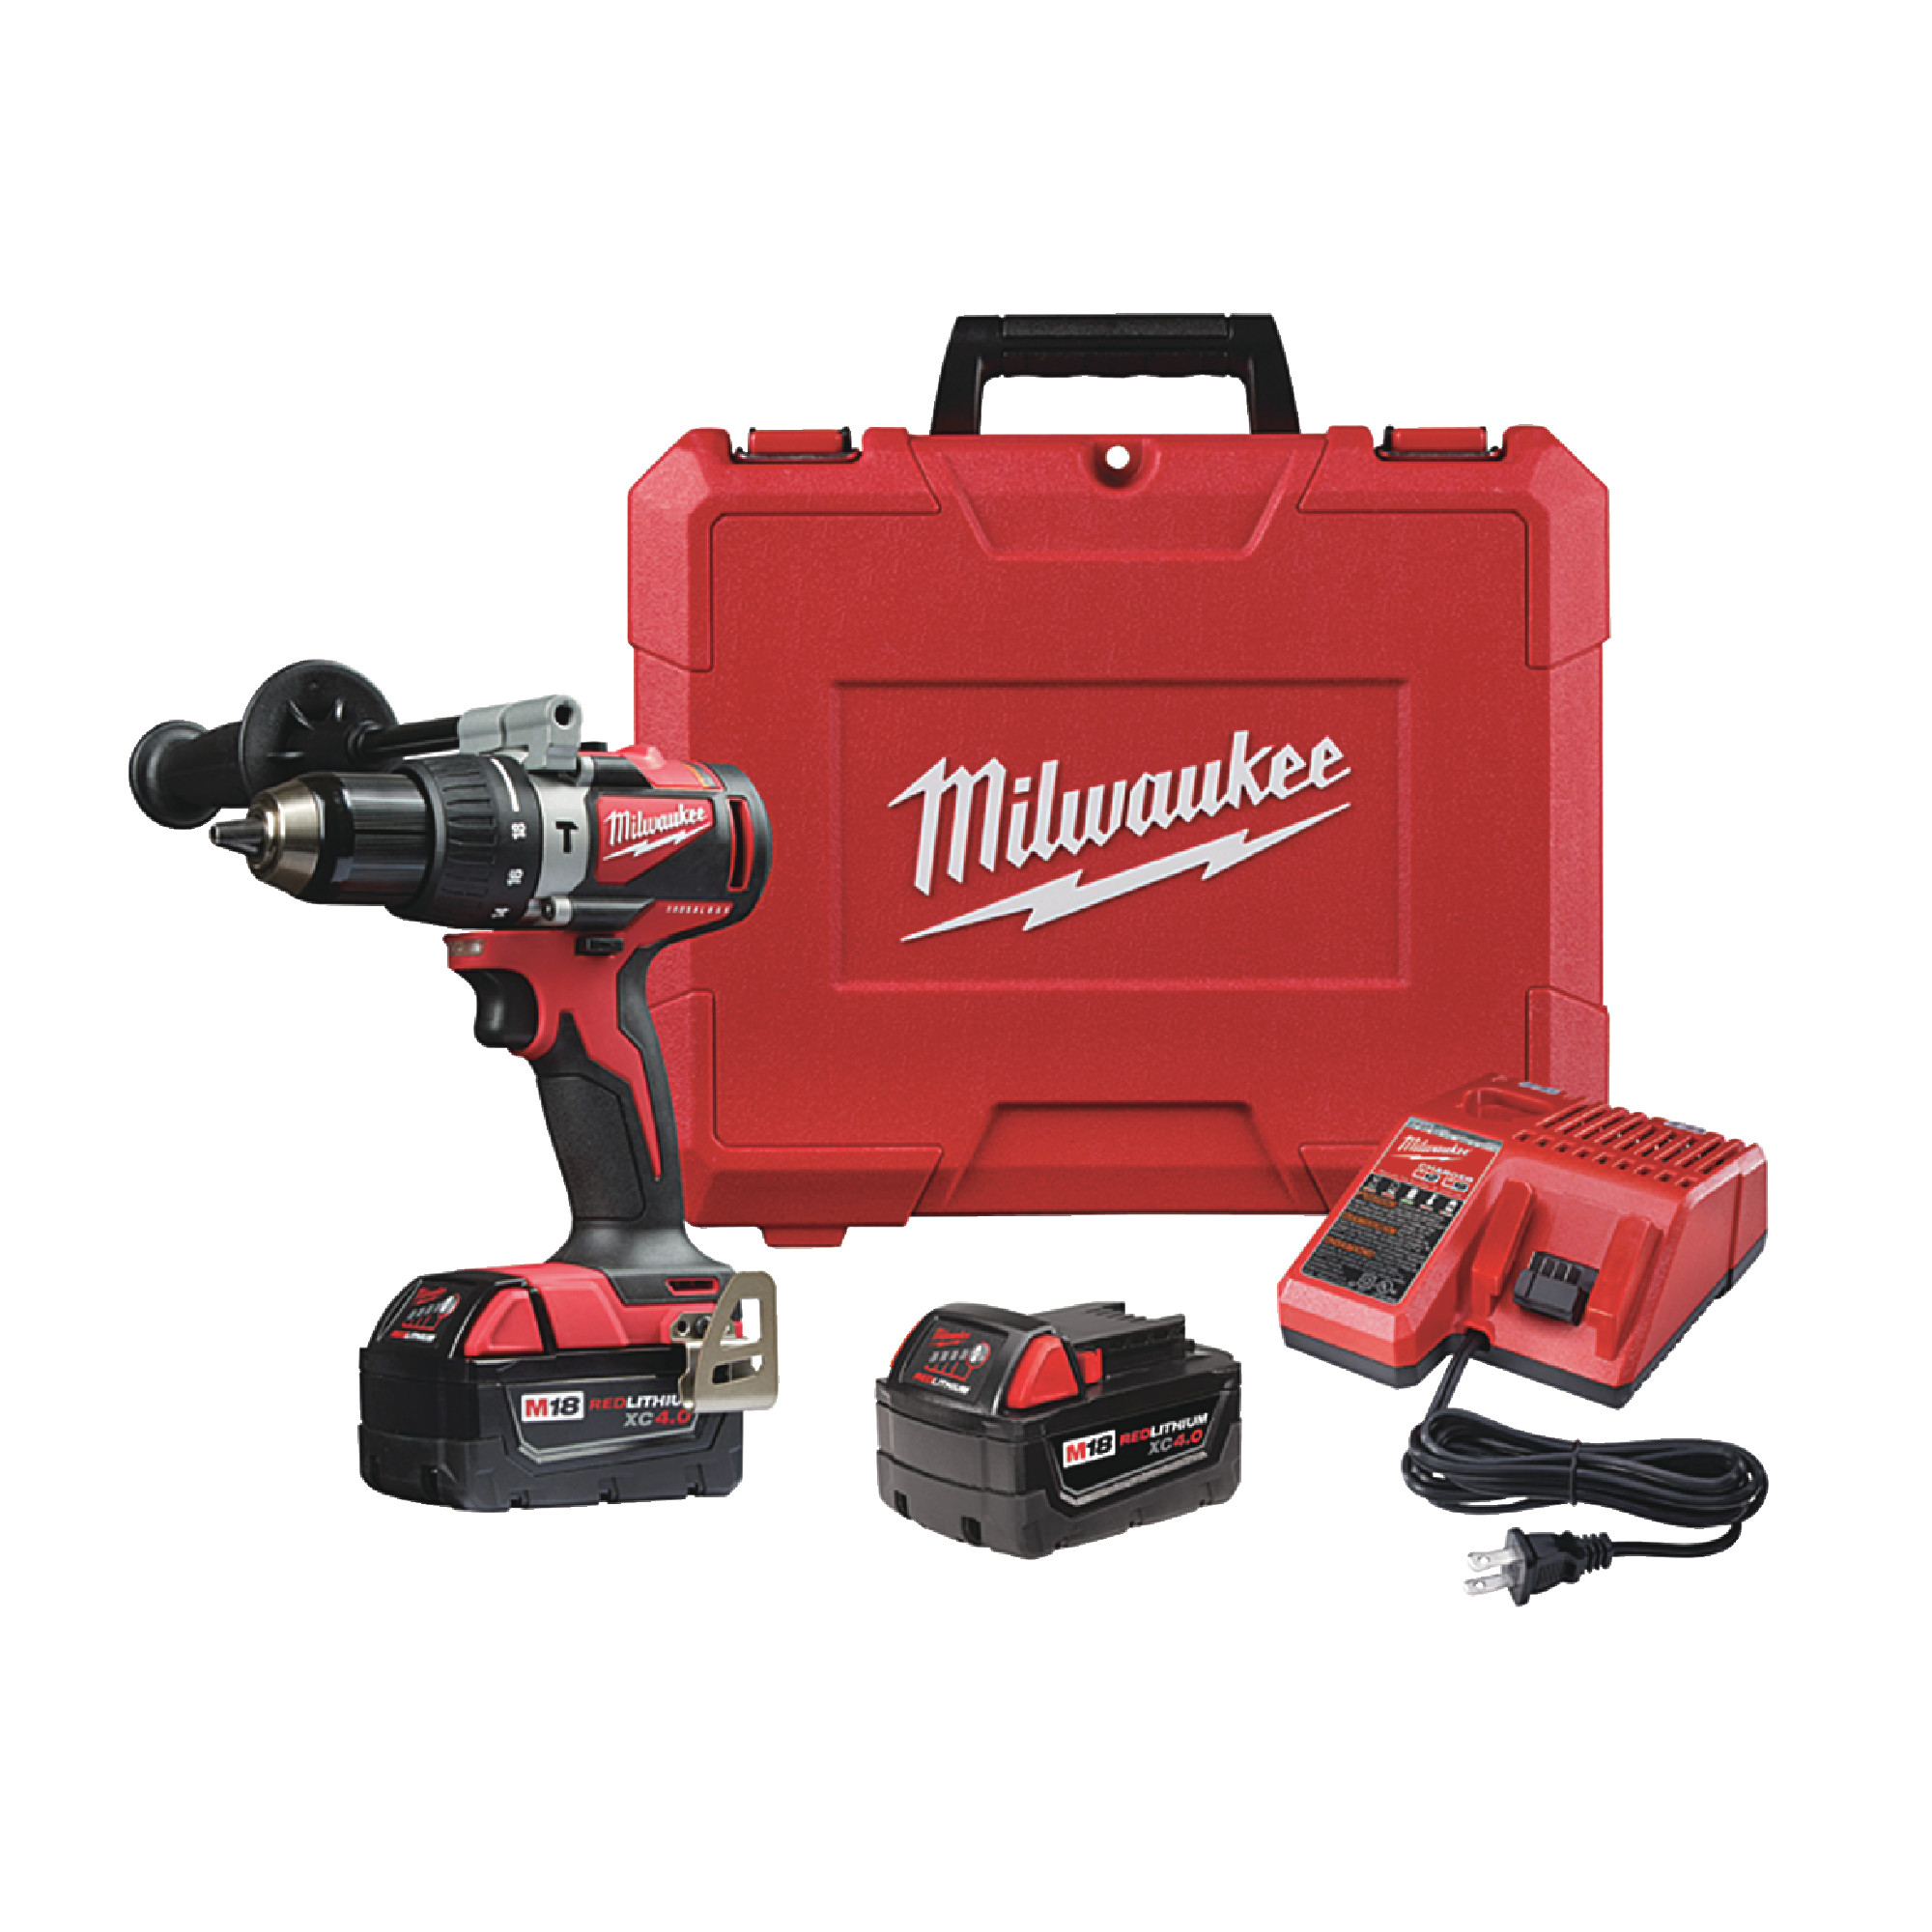 M18&#8482; 1/2" Compact Brushless Hammer Drill/Driver Kit